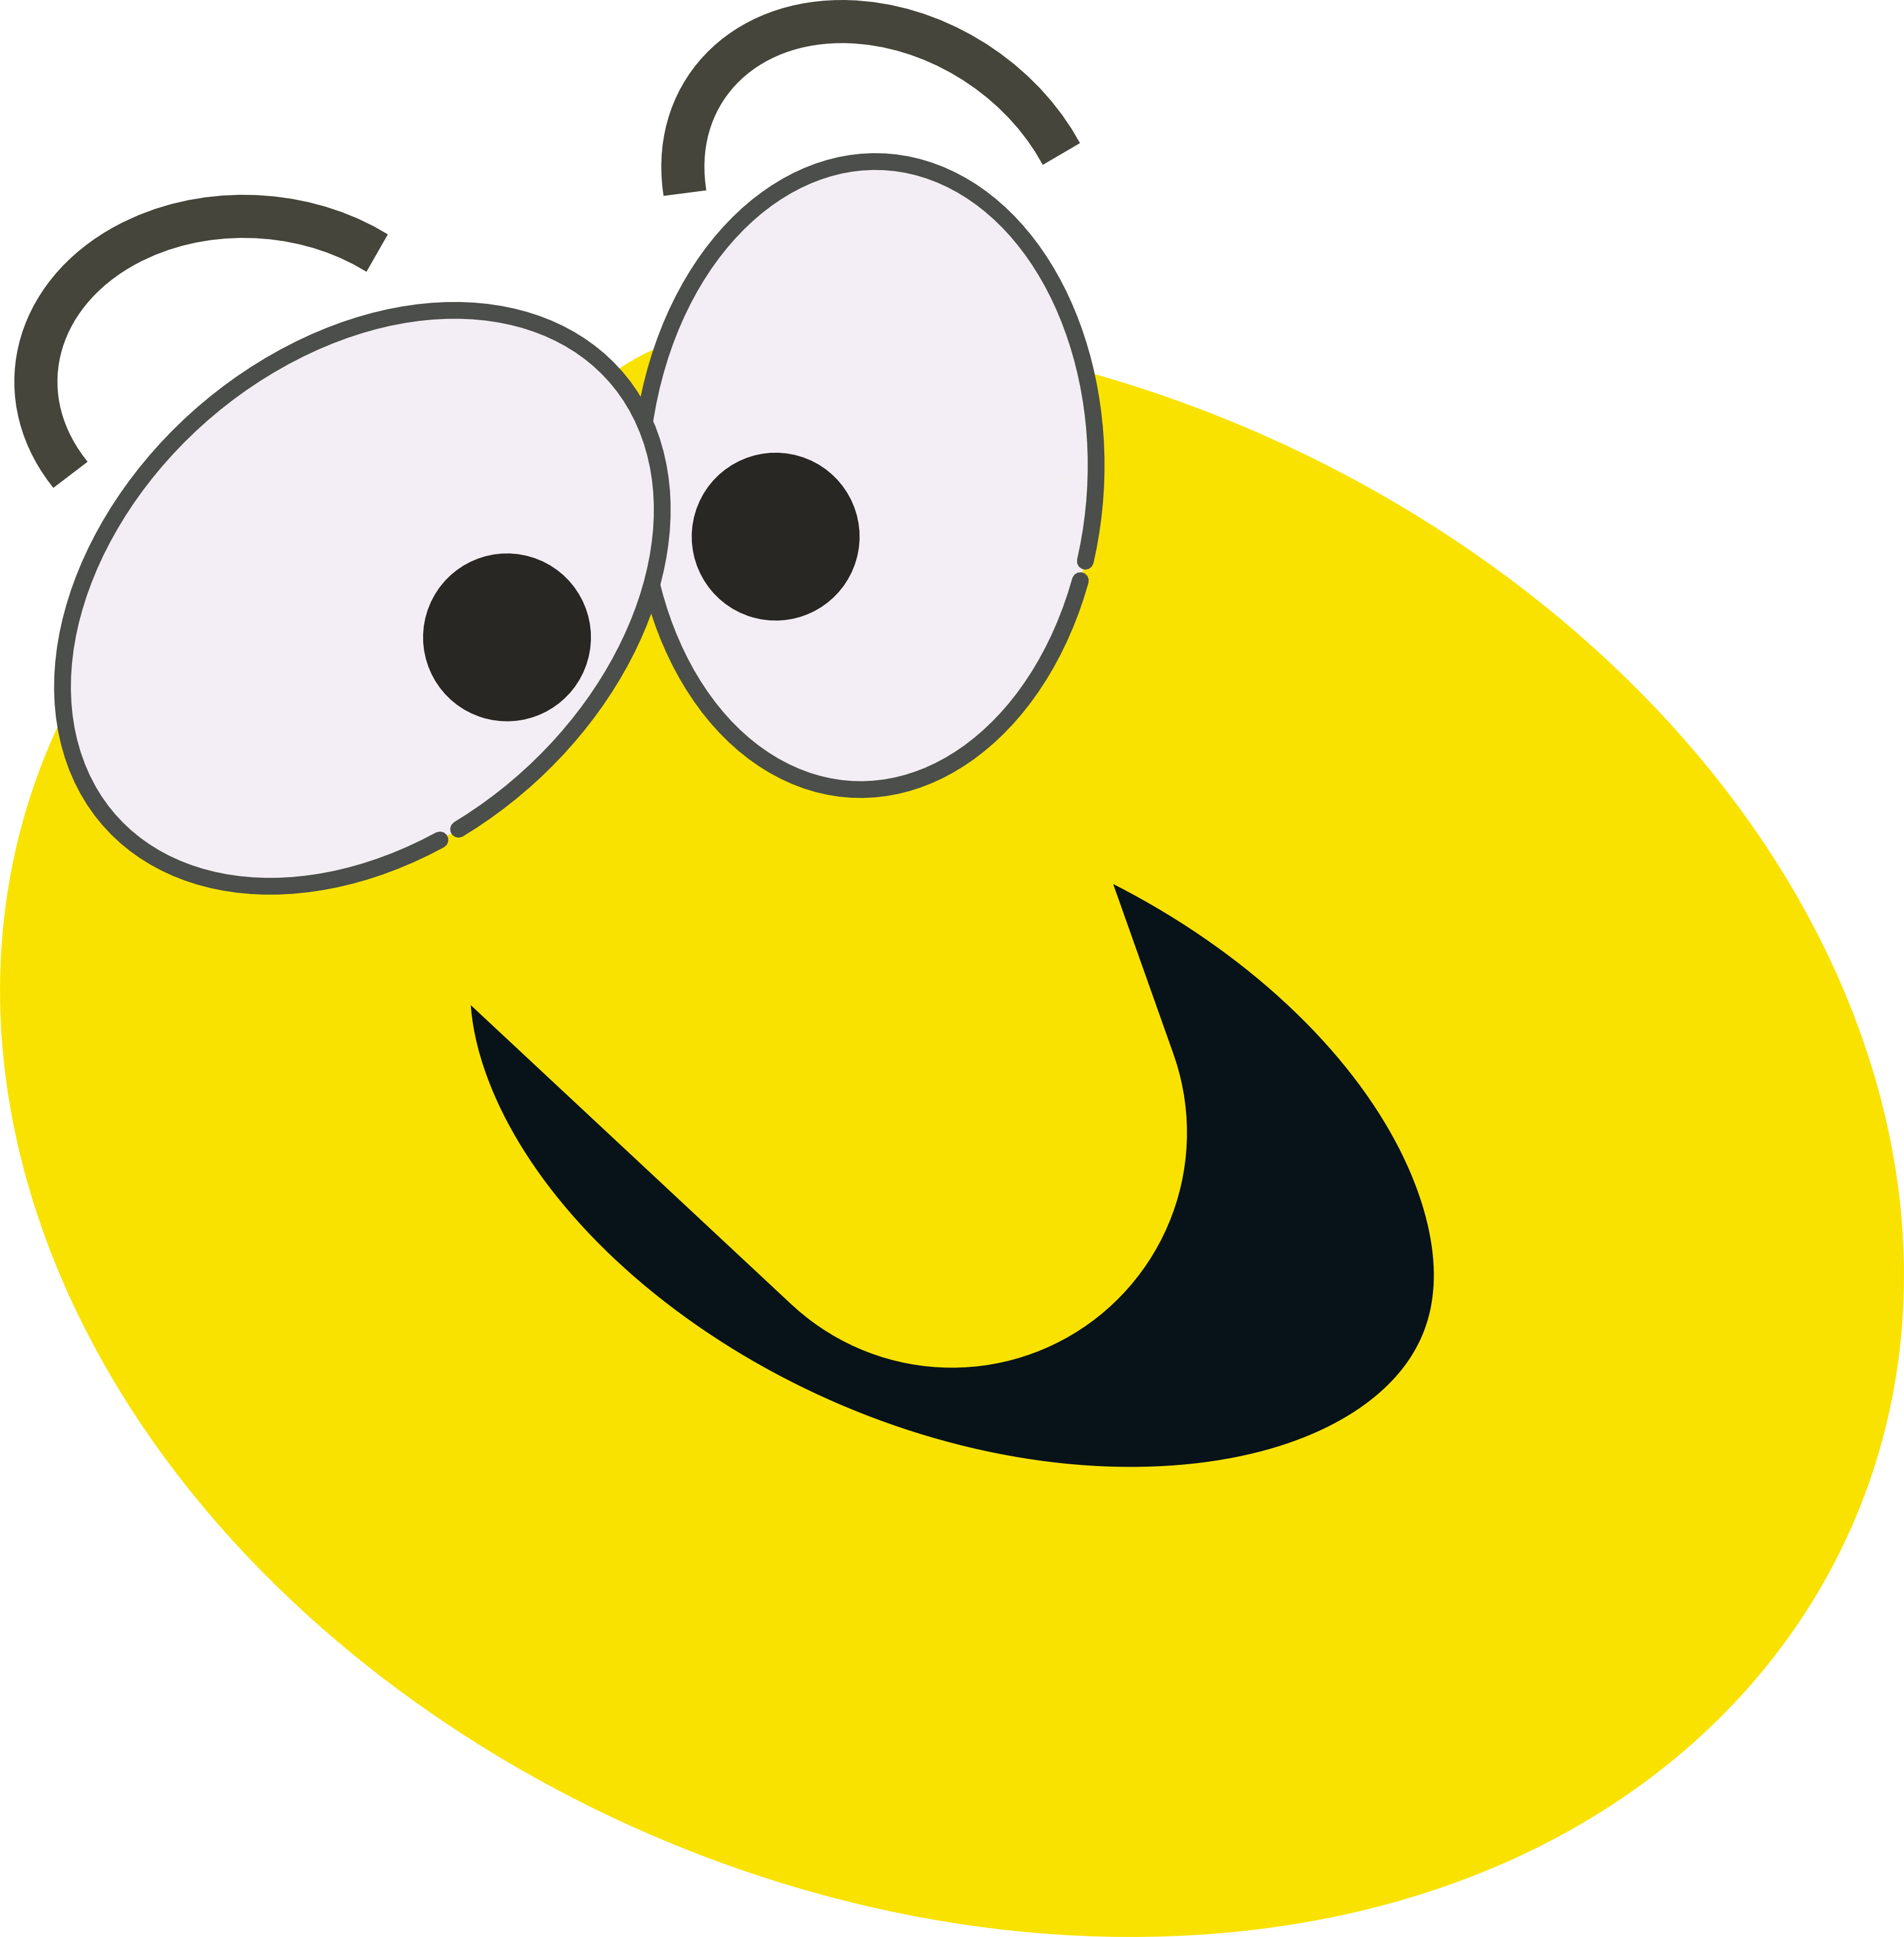 Bored Cartoon Face | Free Download Clip Art | Free Clip Art | on ...